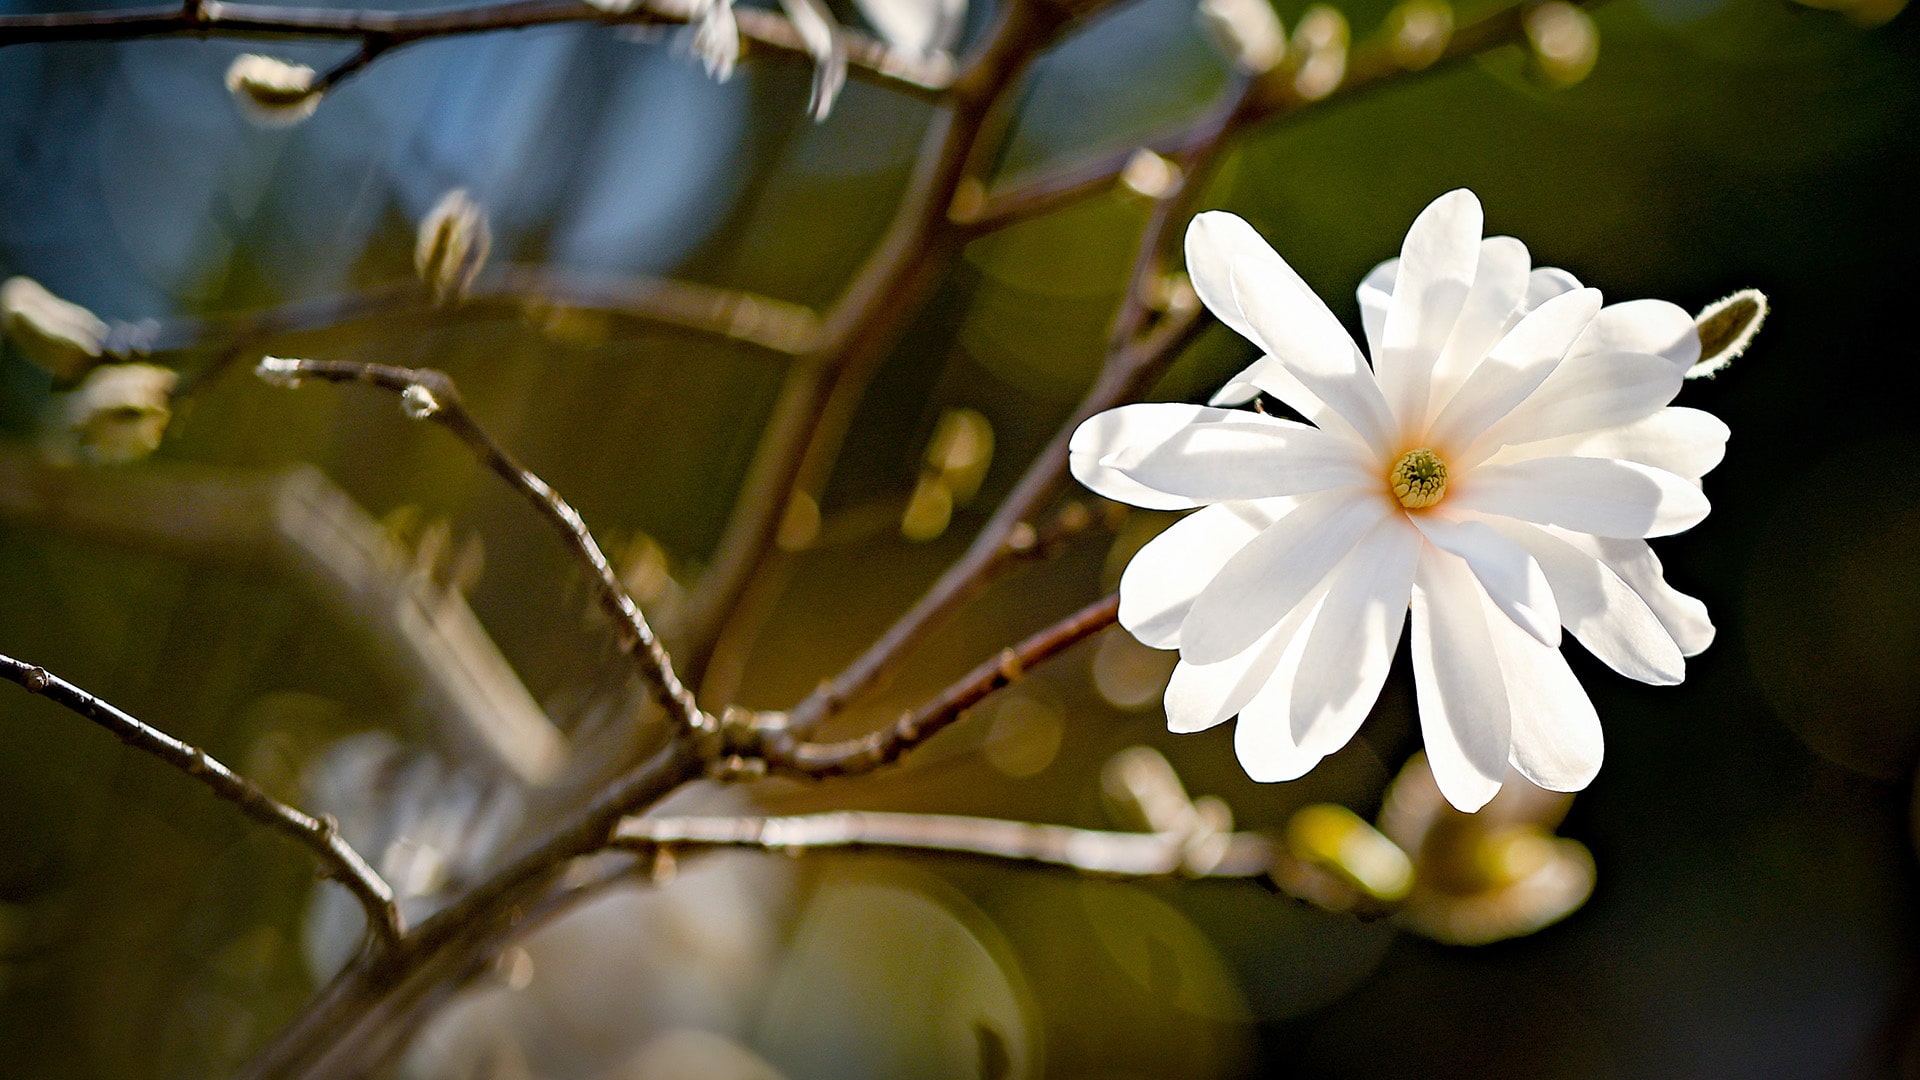 A single white bloom on a tree in spring.